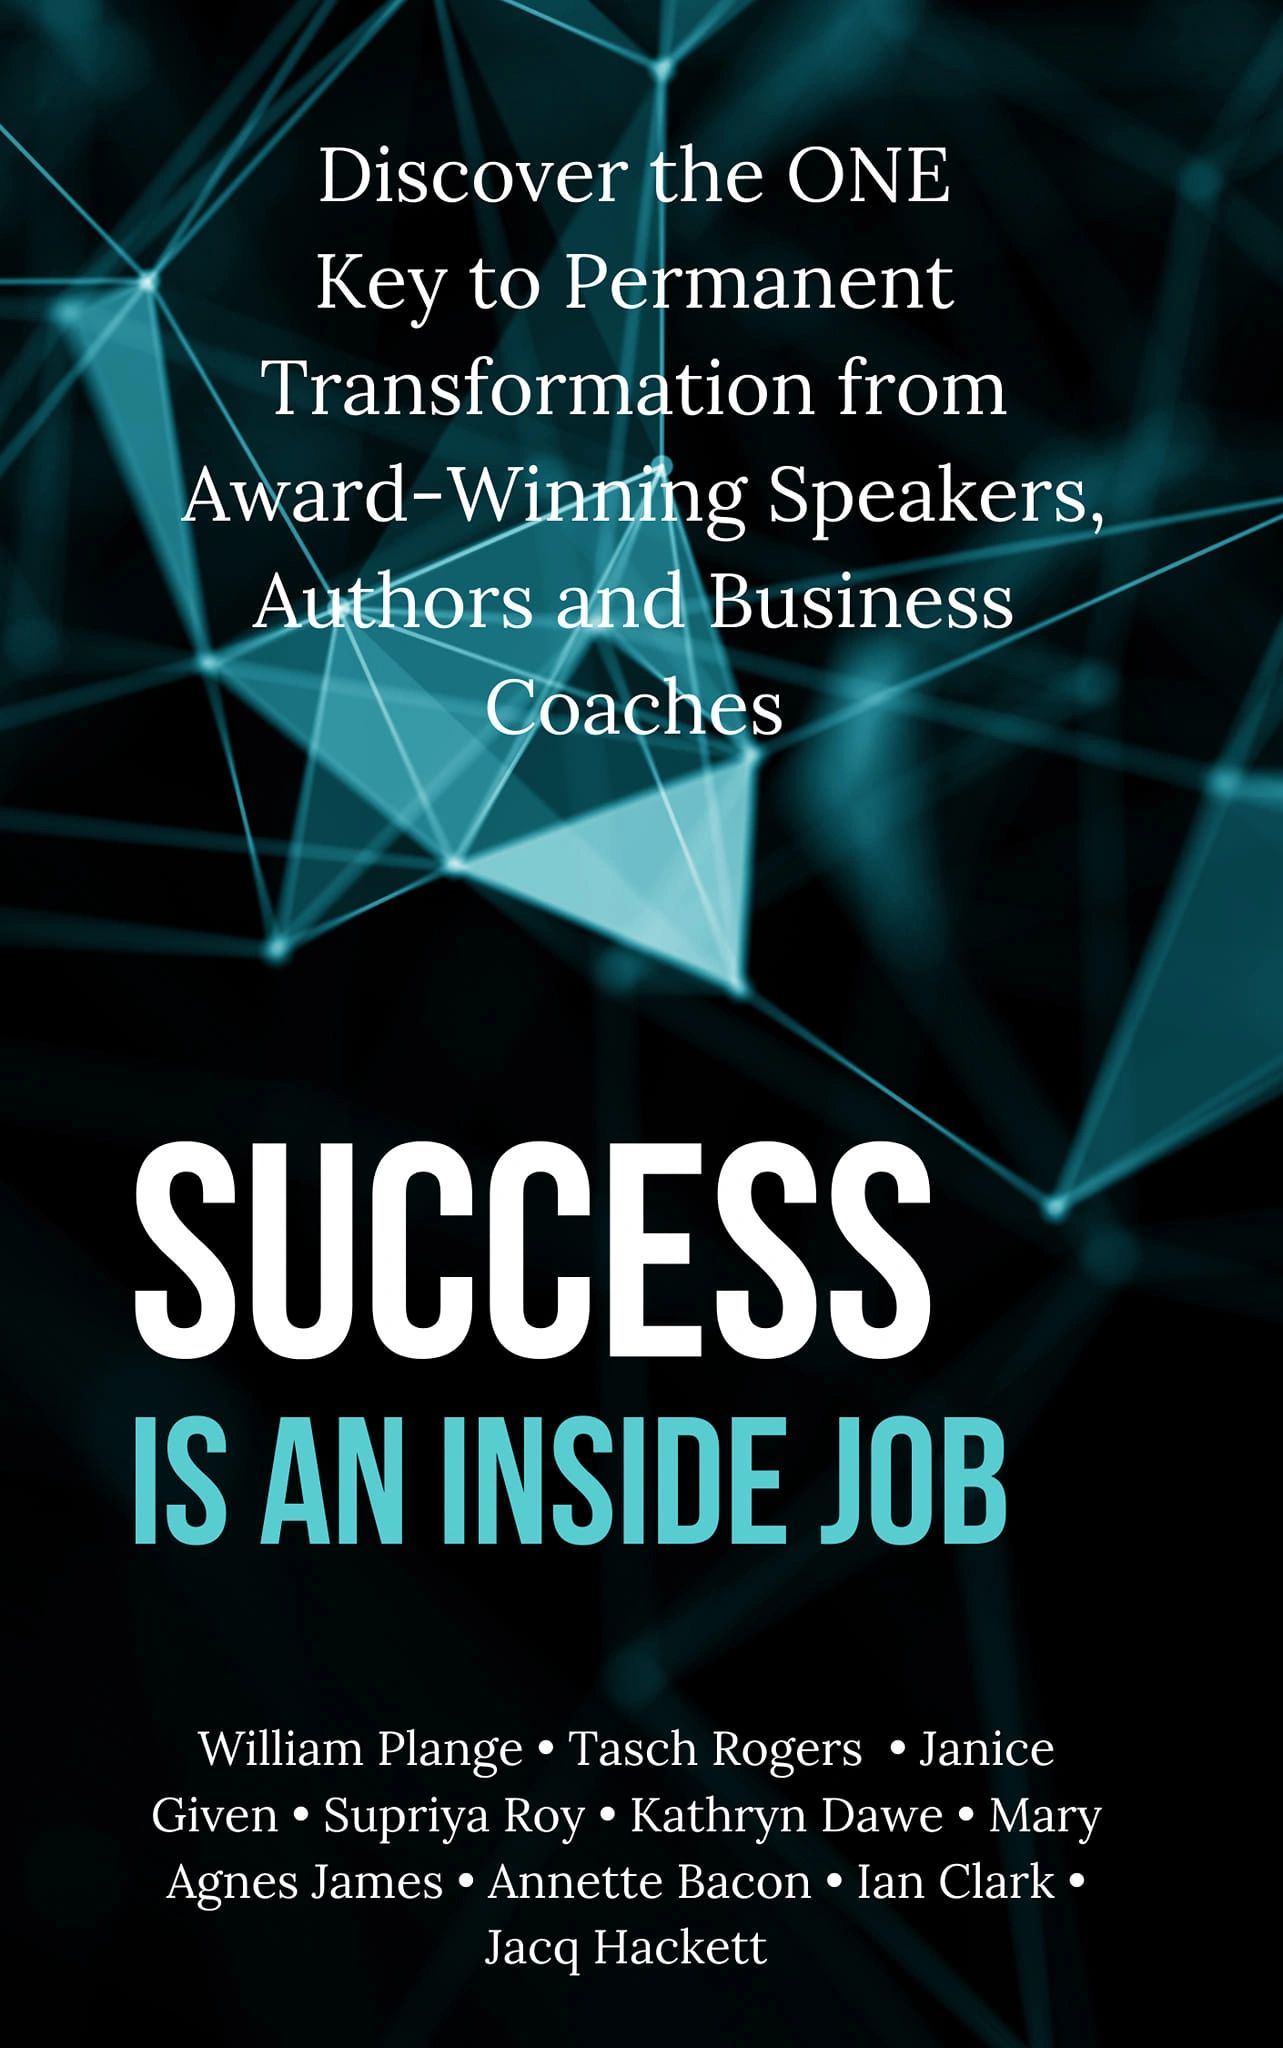 Book Cover title: Success is an Inside Job with collaborating authors including Jacq Hackett